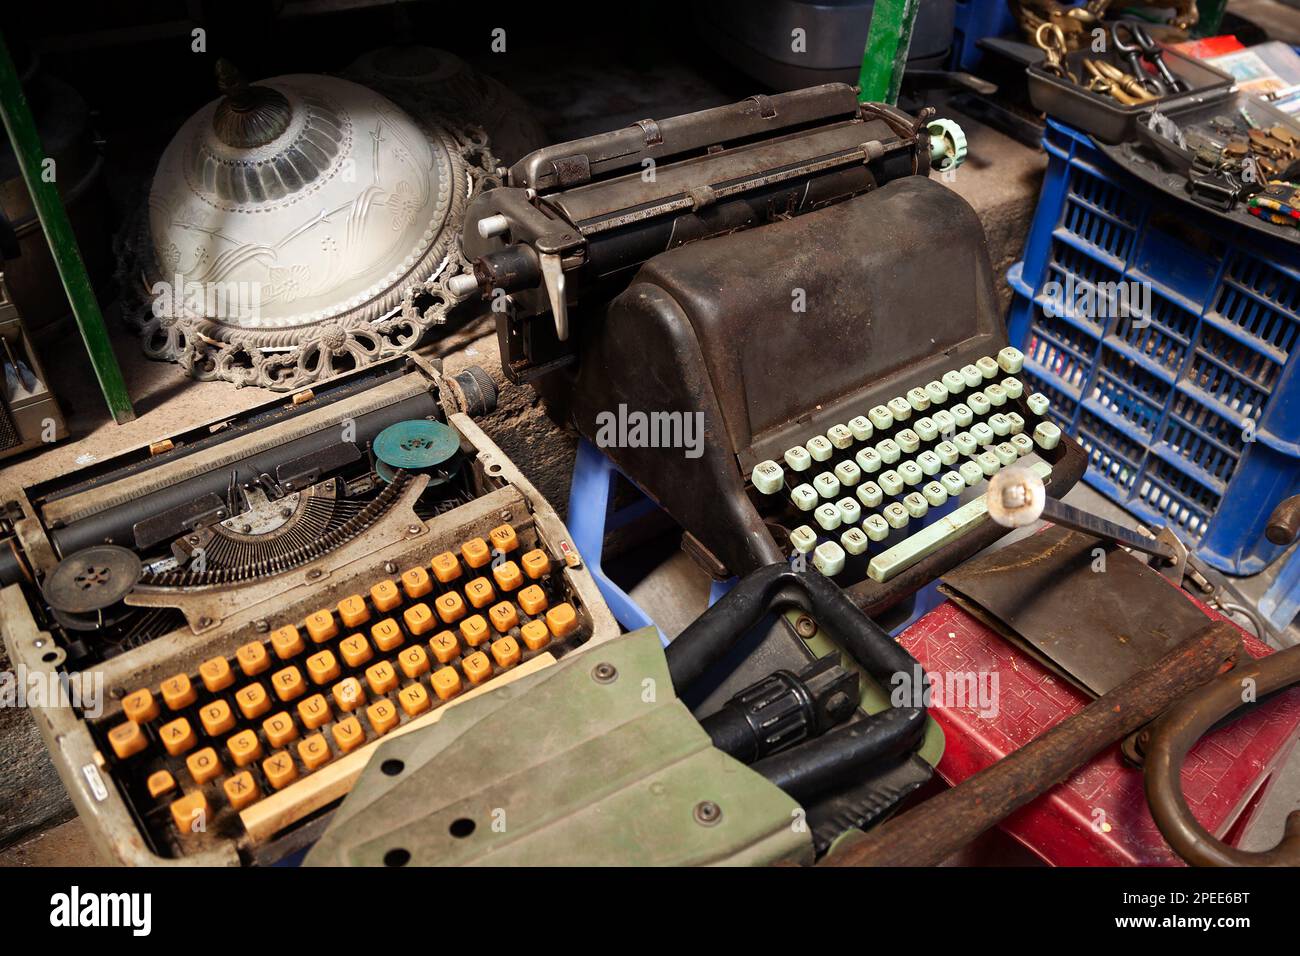 Antique typewriters and other collectible memorabilia at a flea market. Old junk at a garage sale Stock Photo